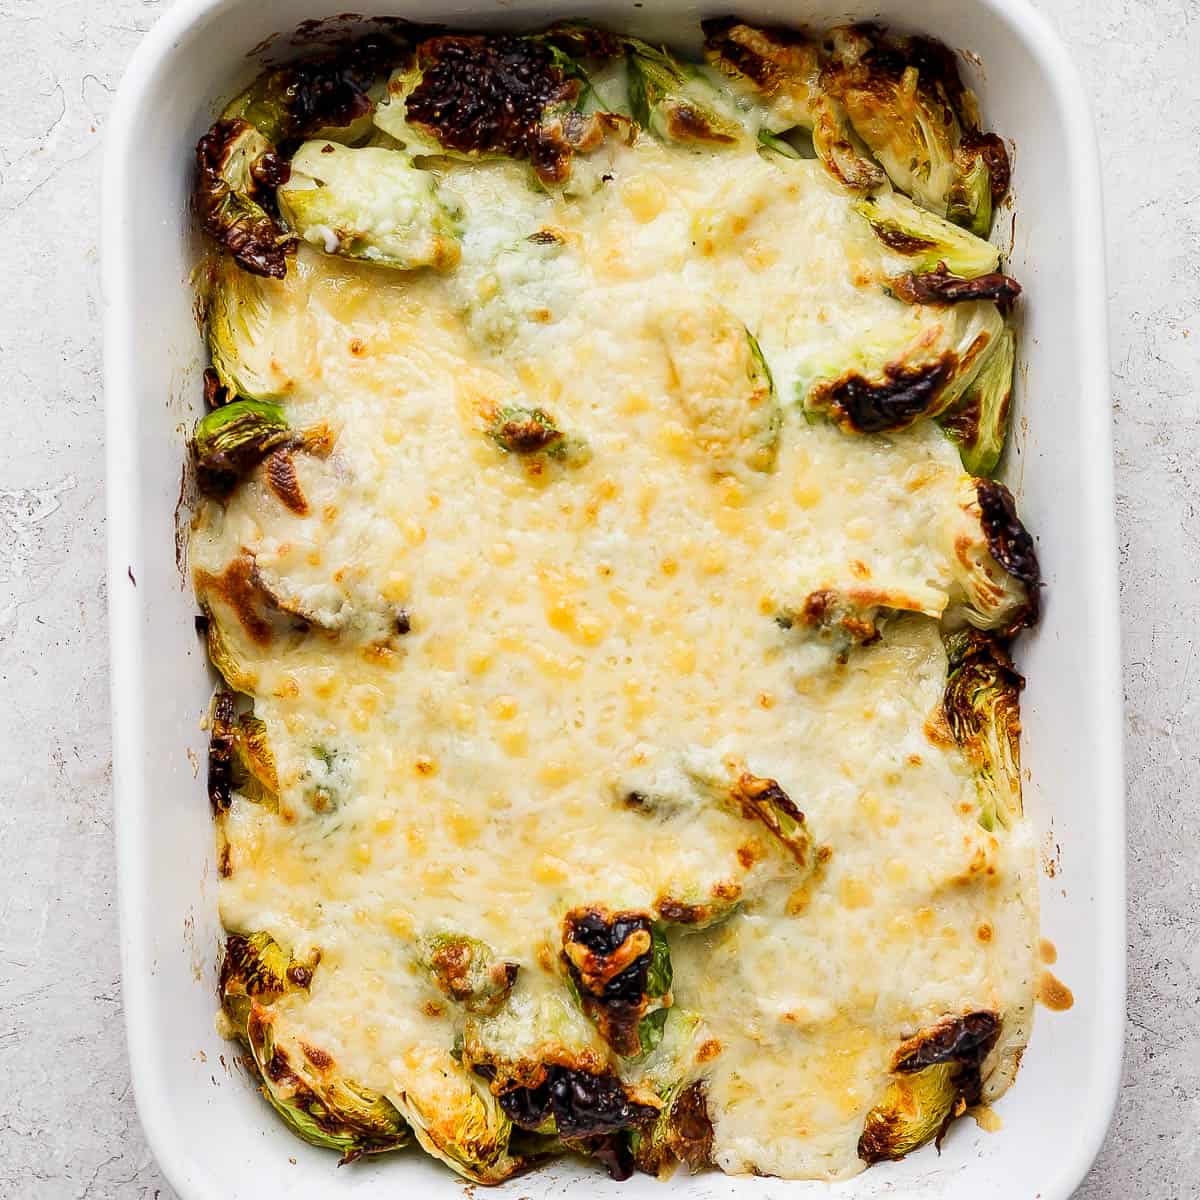 A casserole dish filled with brussel sprouts au gratin.